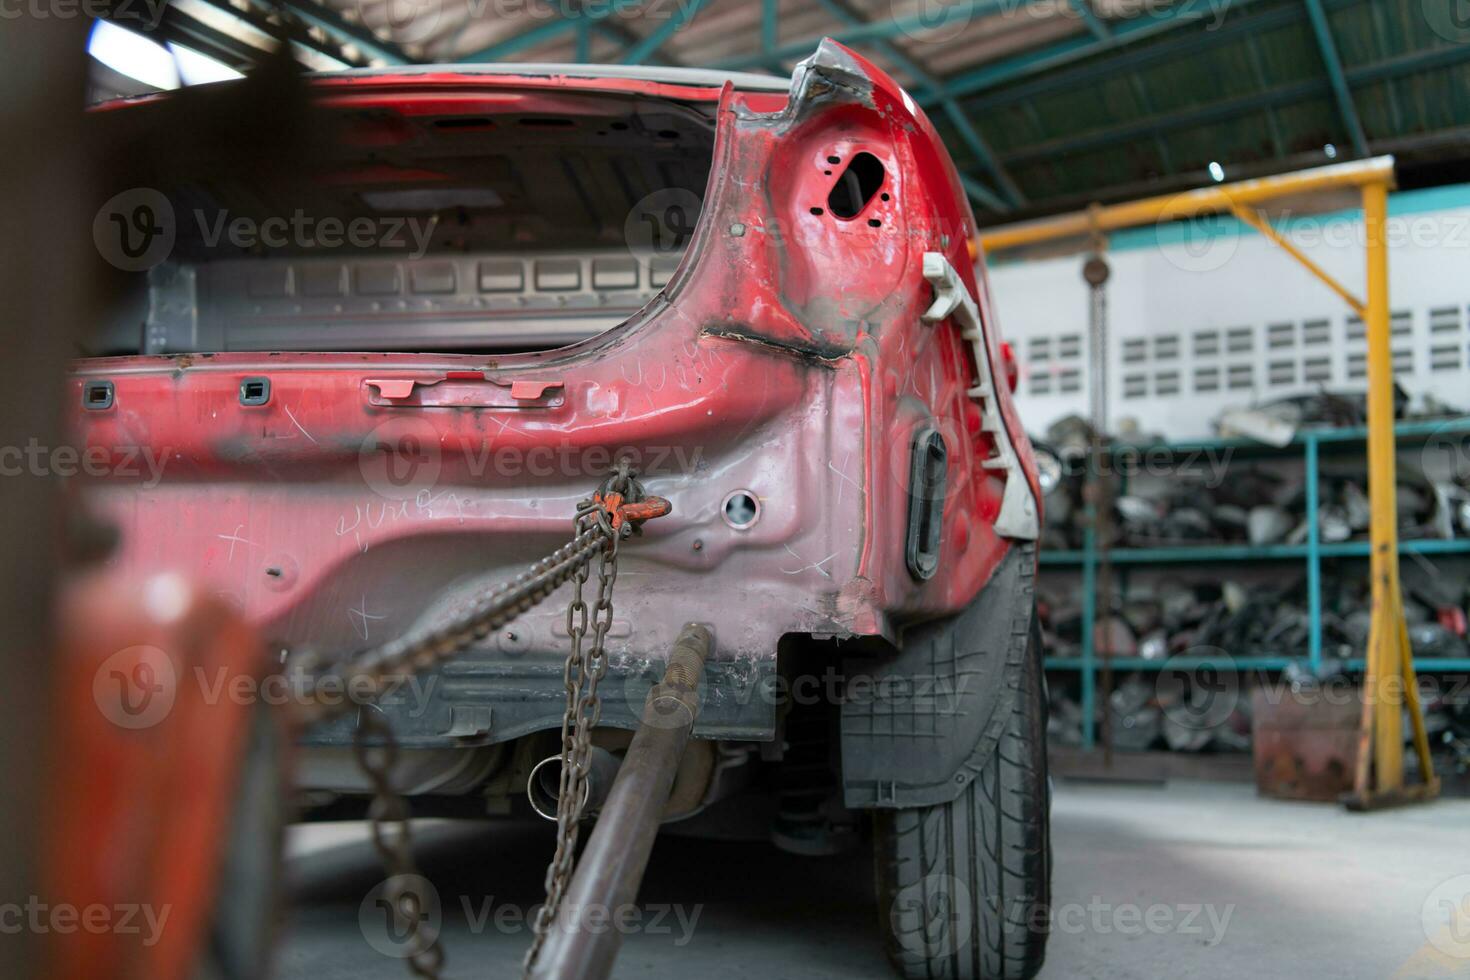 The car crashed so hard that the car body collapsed into distortion. A car body puller is required to restore the car body to its original shape. photo